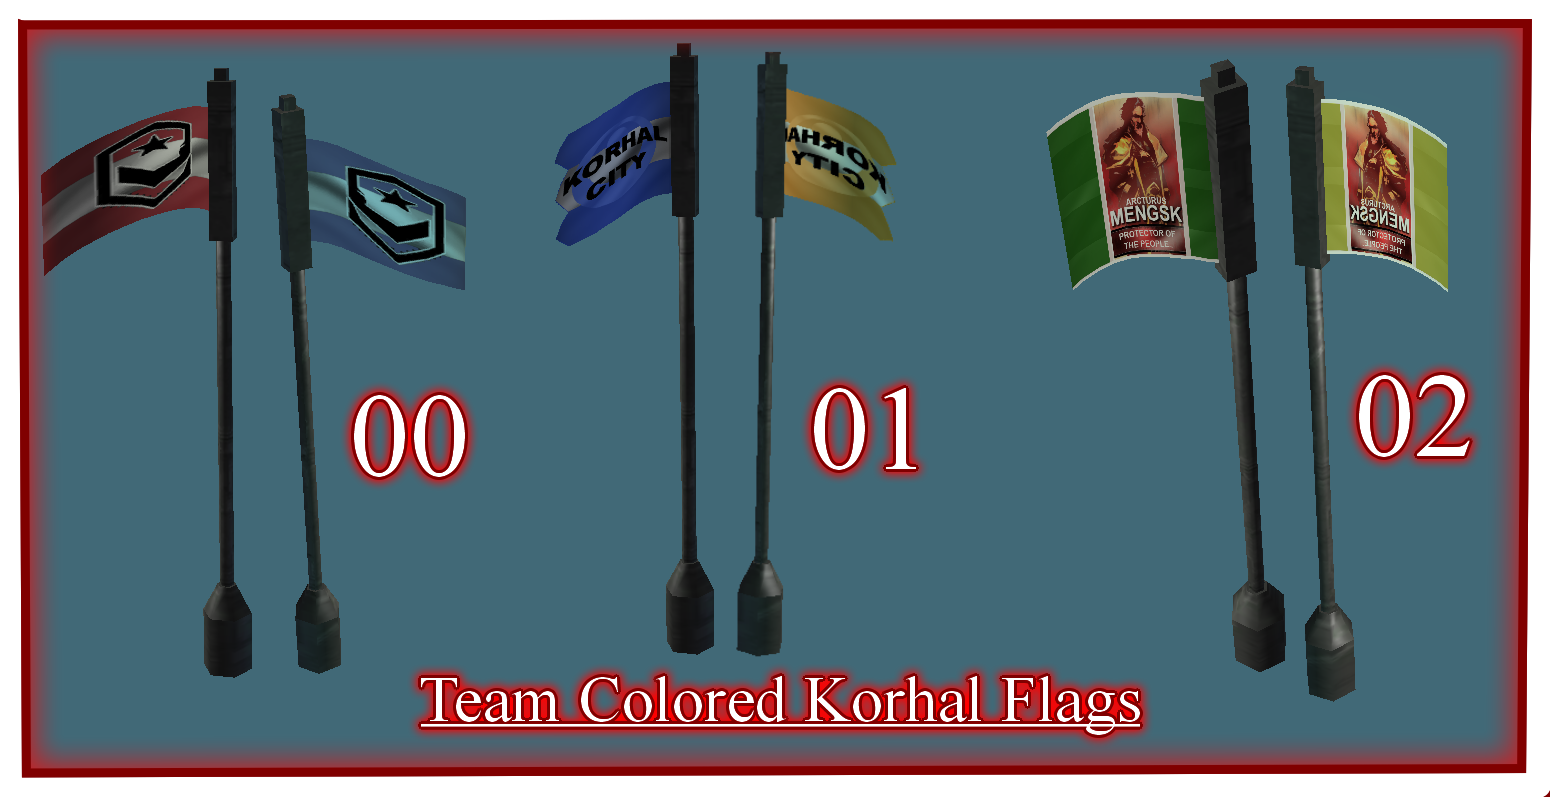 Team Colored Korhal Flags